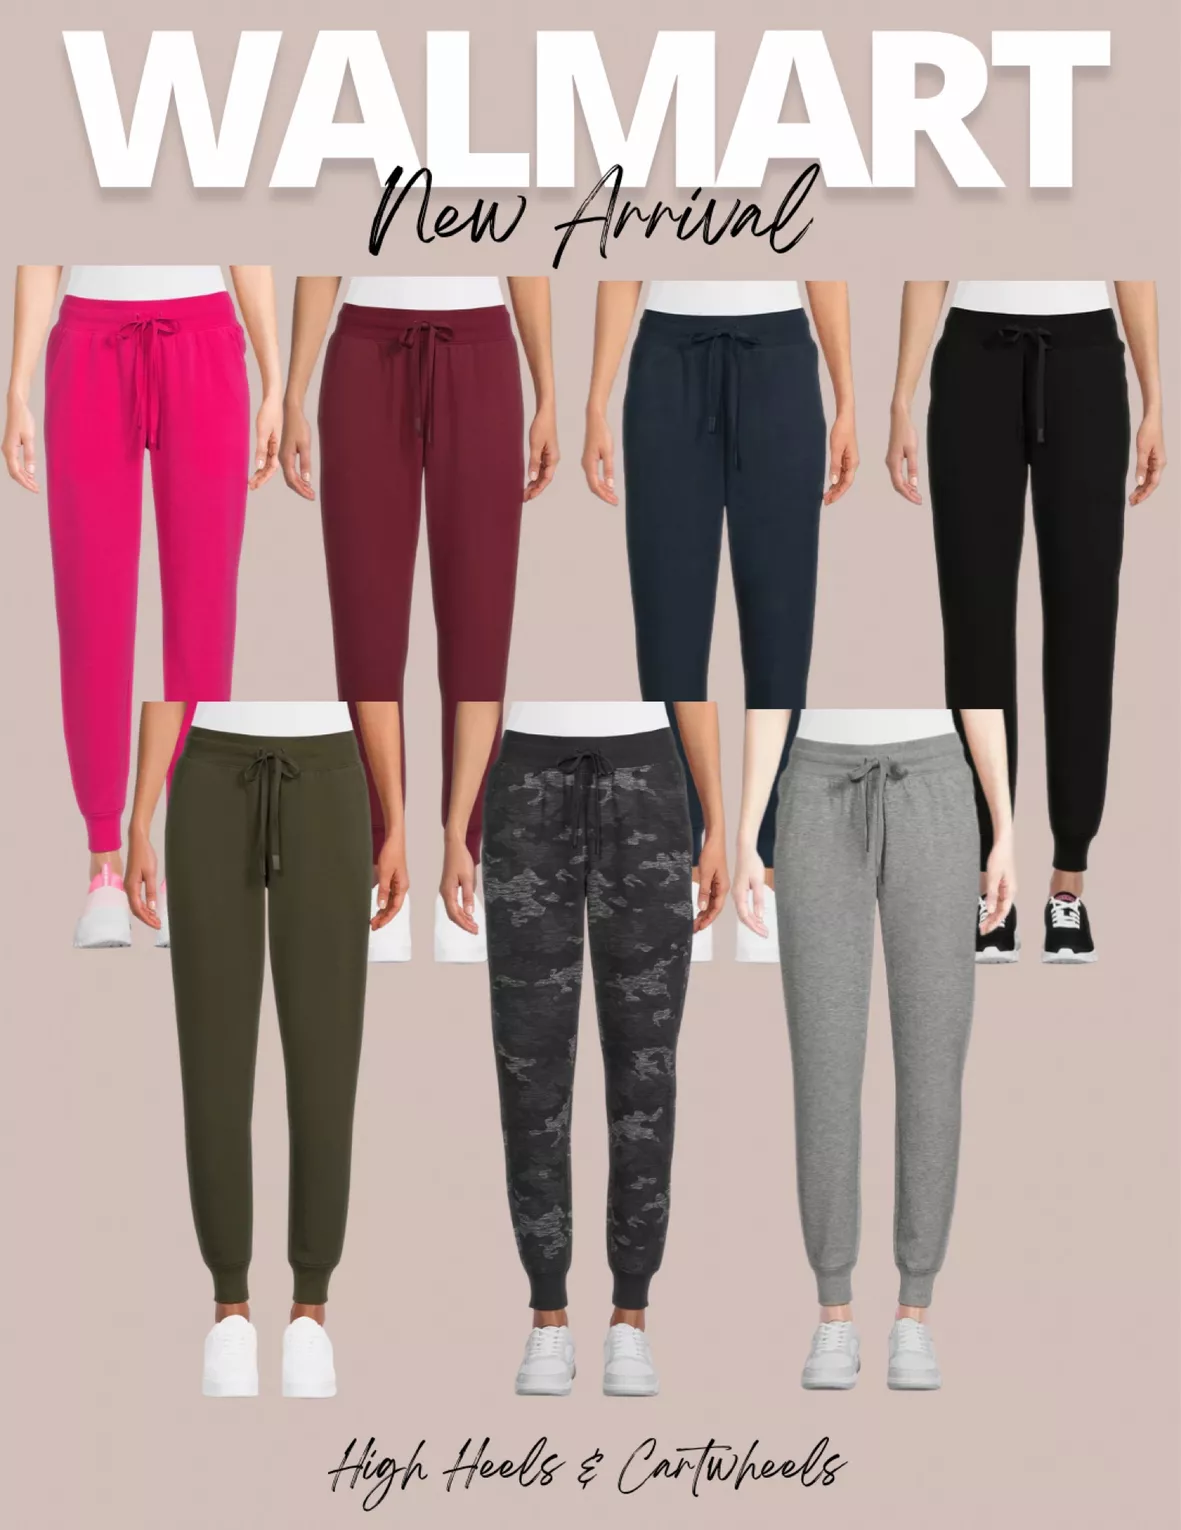 Athletic Works Women's Joggers 